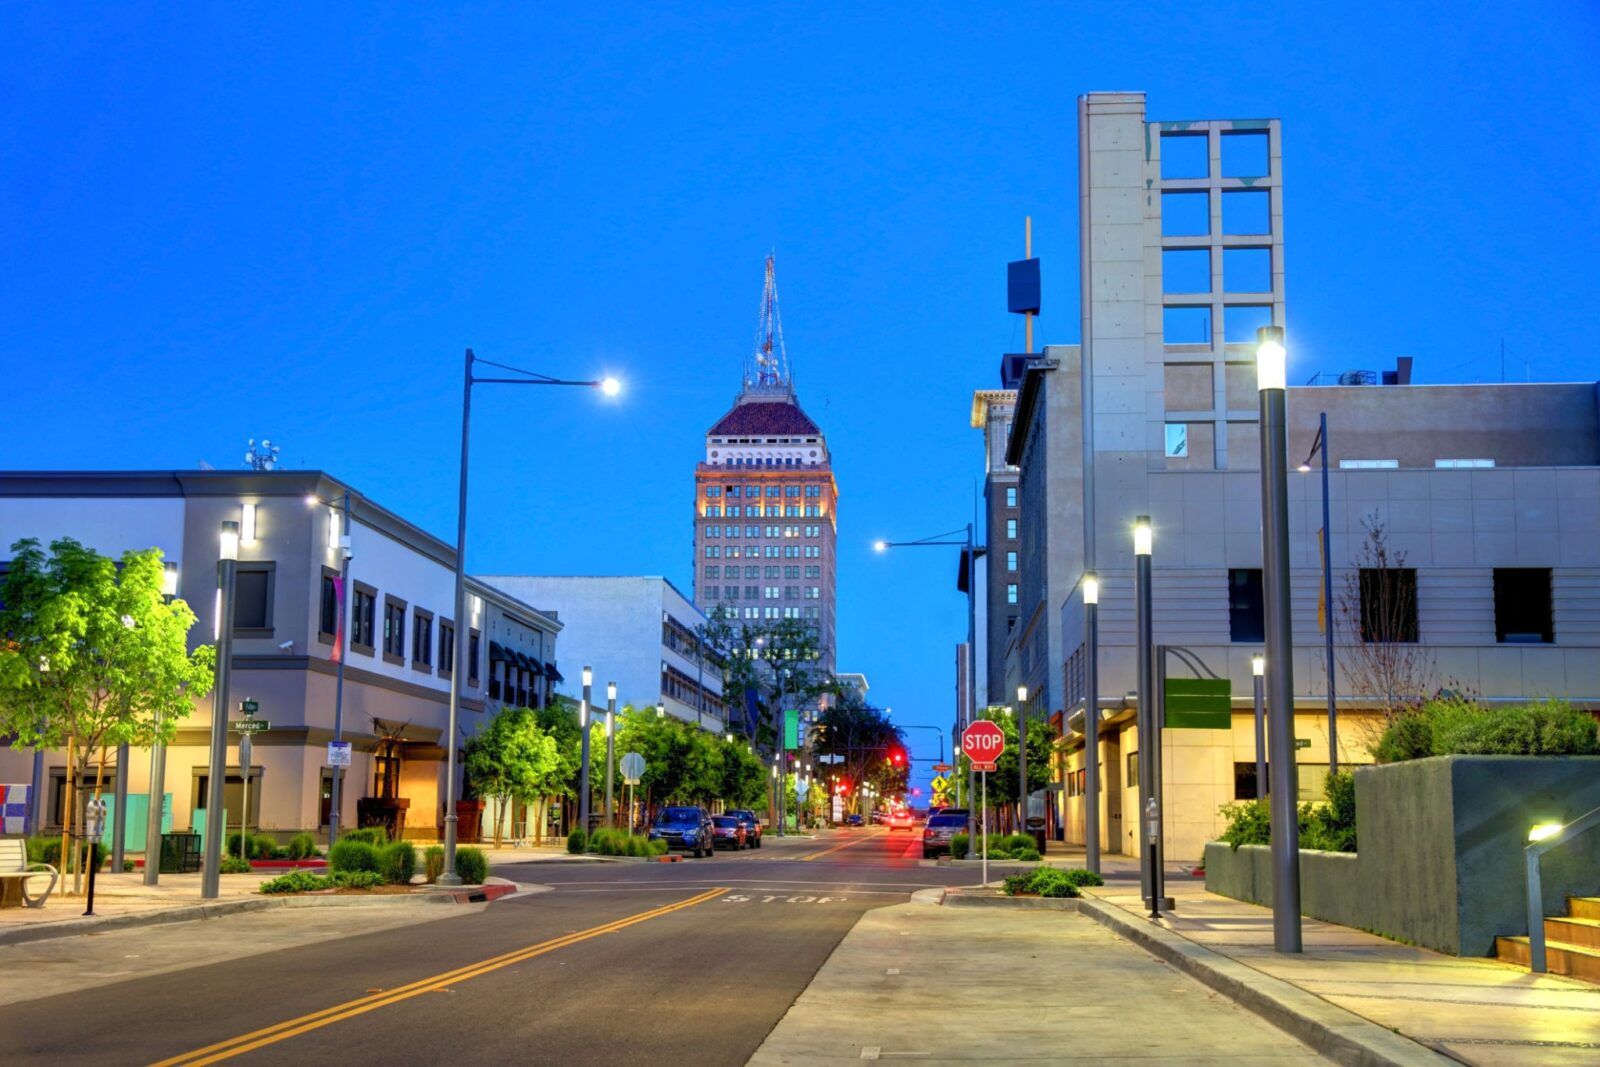 Fresno is a city in California, United States, and the county seat of Fresno County.